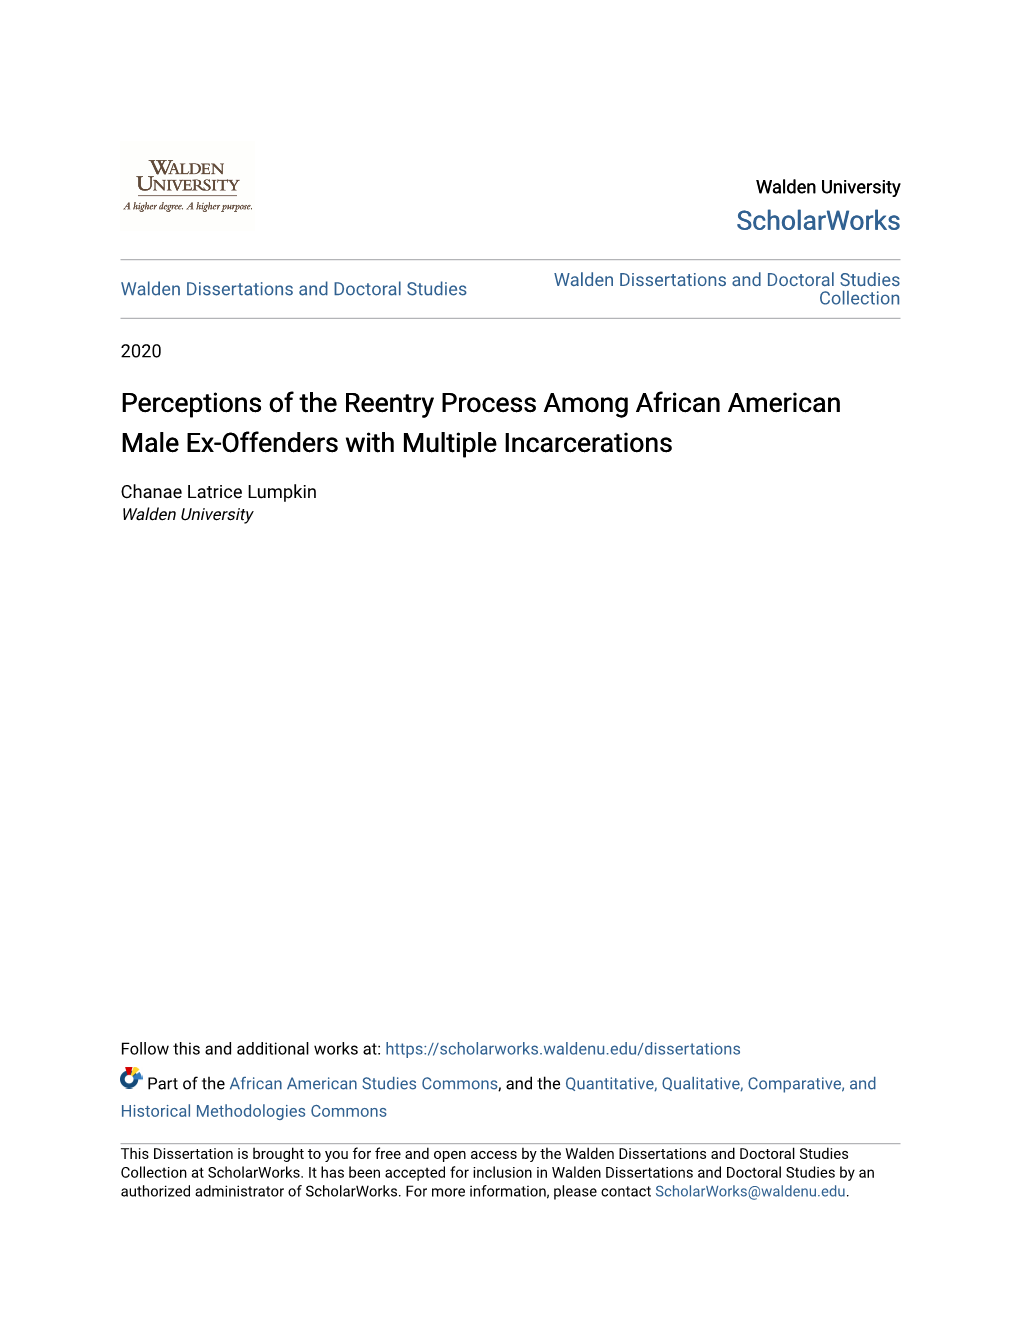 Perceptions of the Reentry Process Among African American Male Ex-Offenders with Multiple Incarcerations